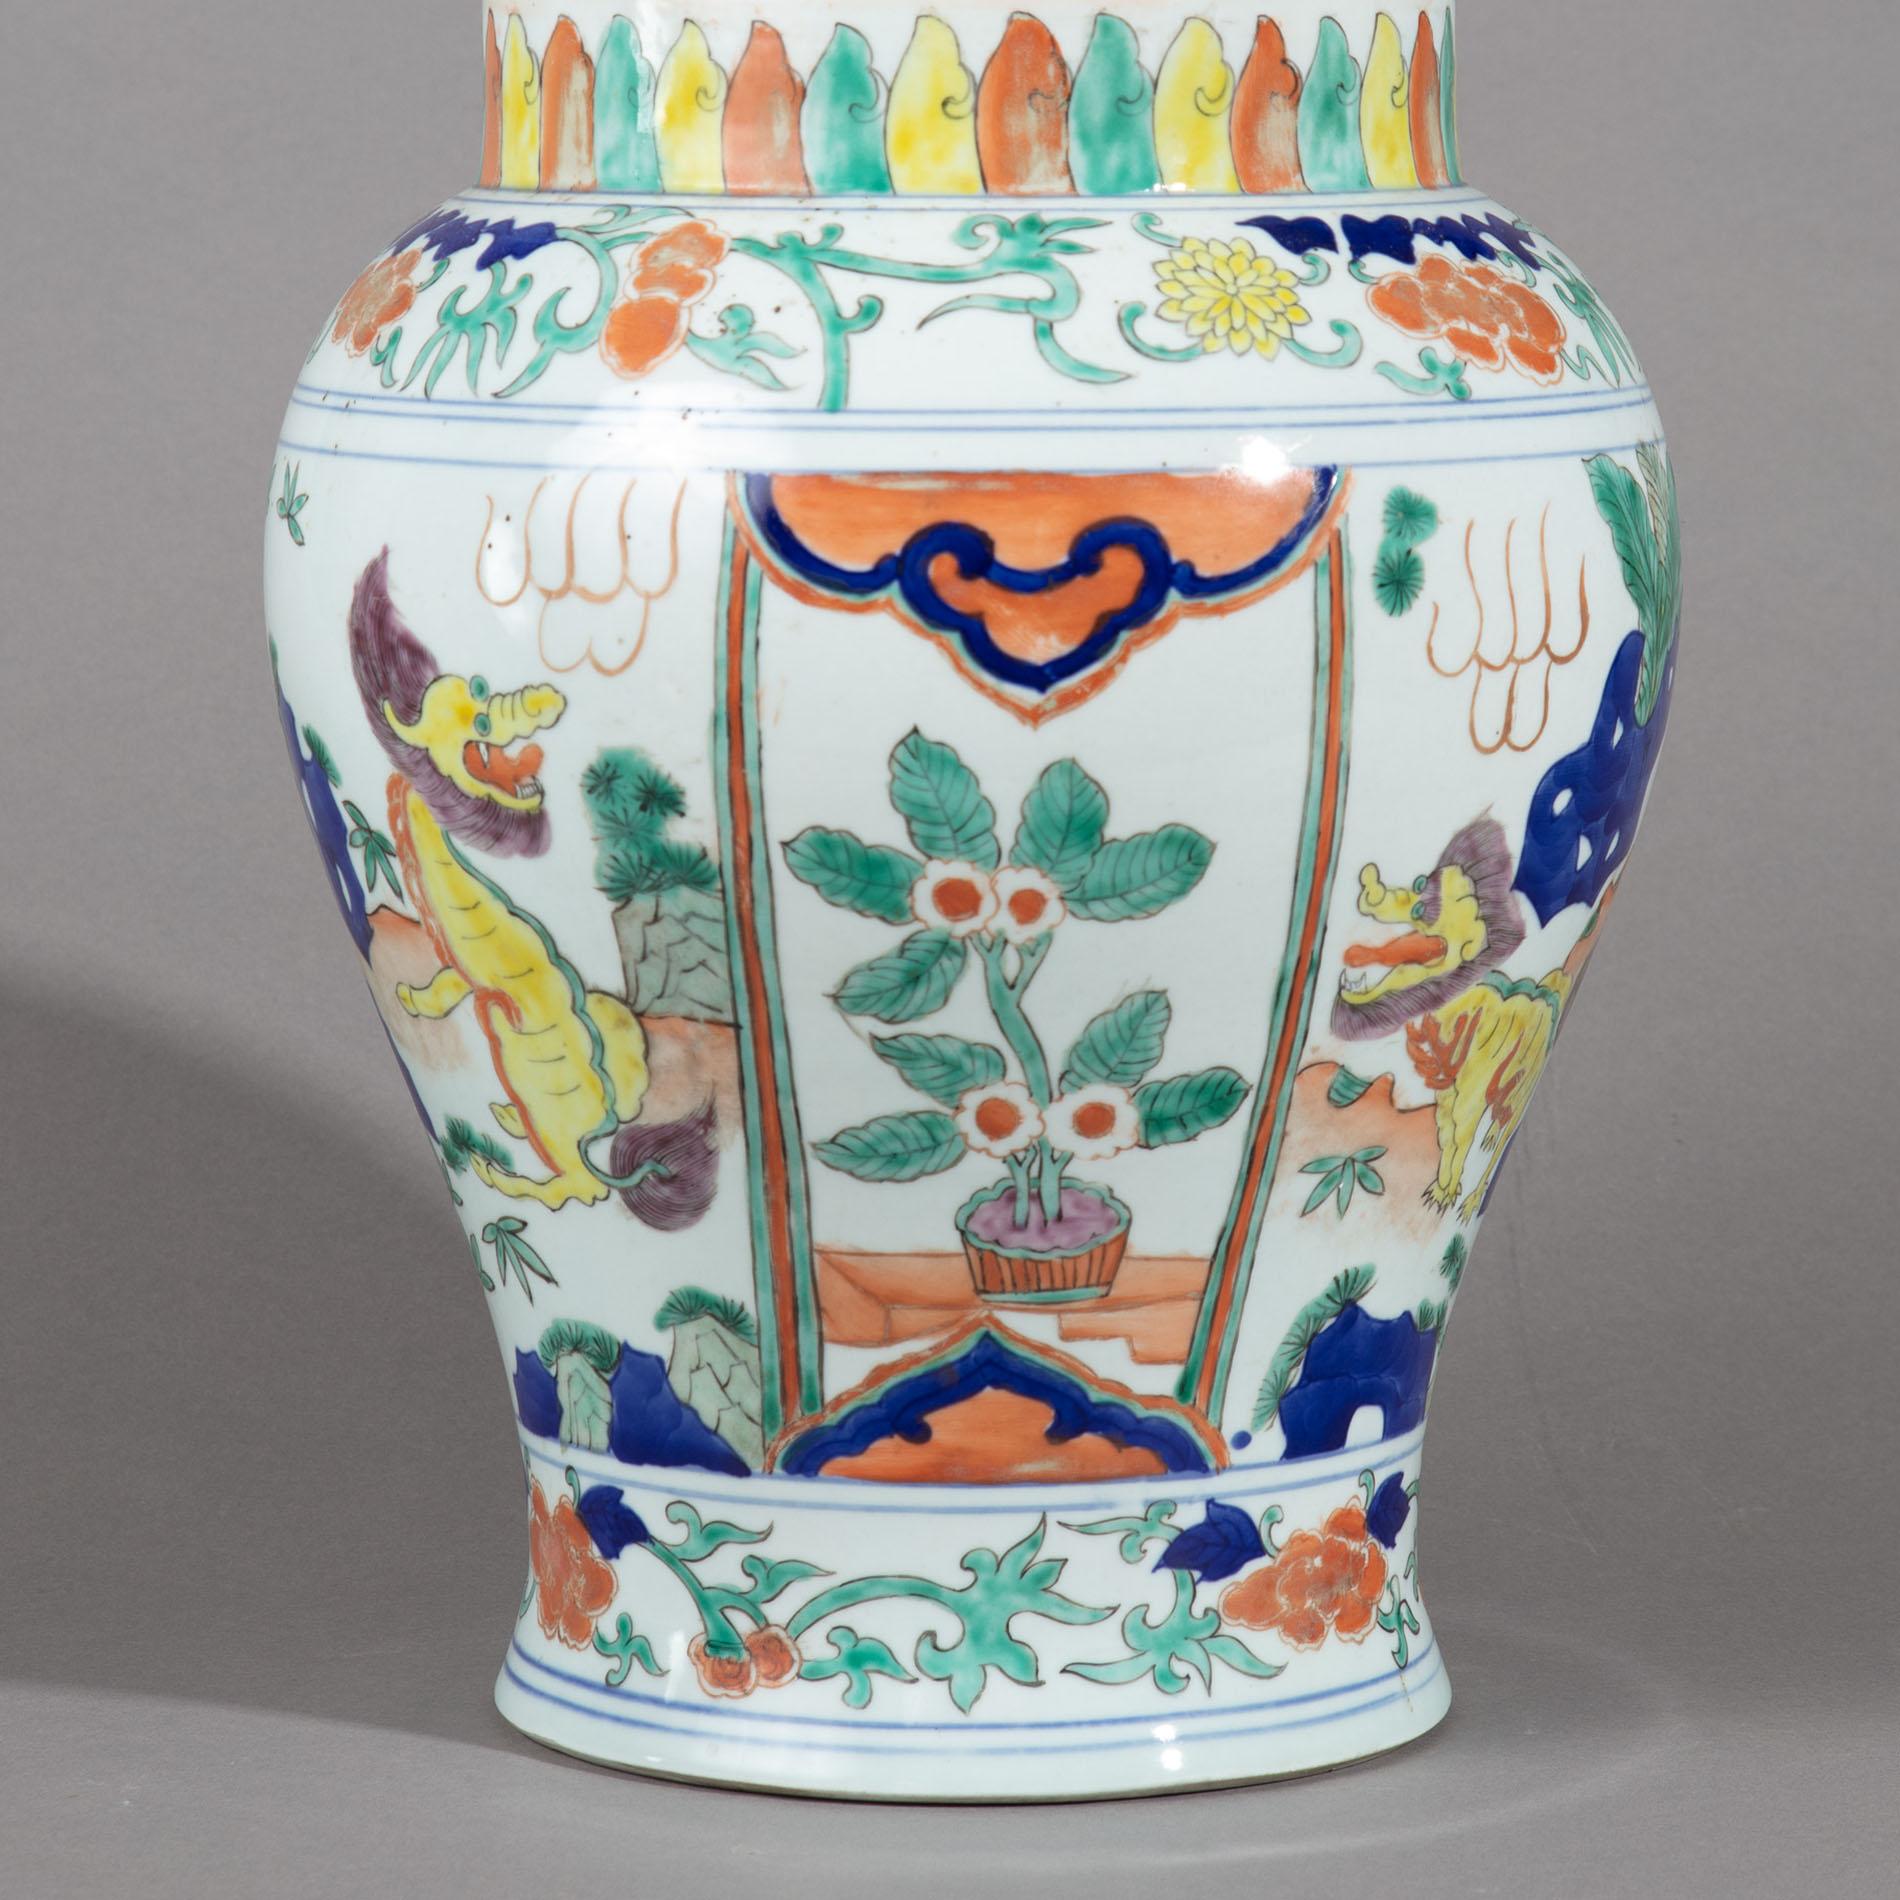 Chinese Famille Verte Porcelain Vase Mounted as a Table Lamp In Excellent Condition In London, by appointment only